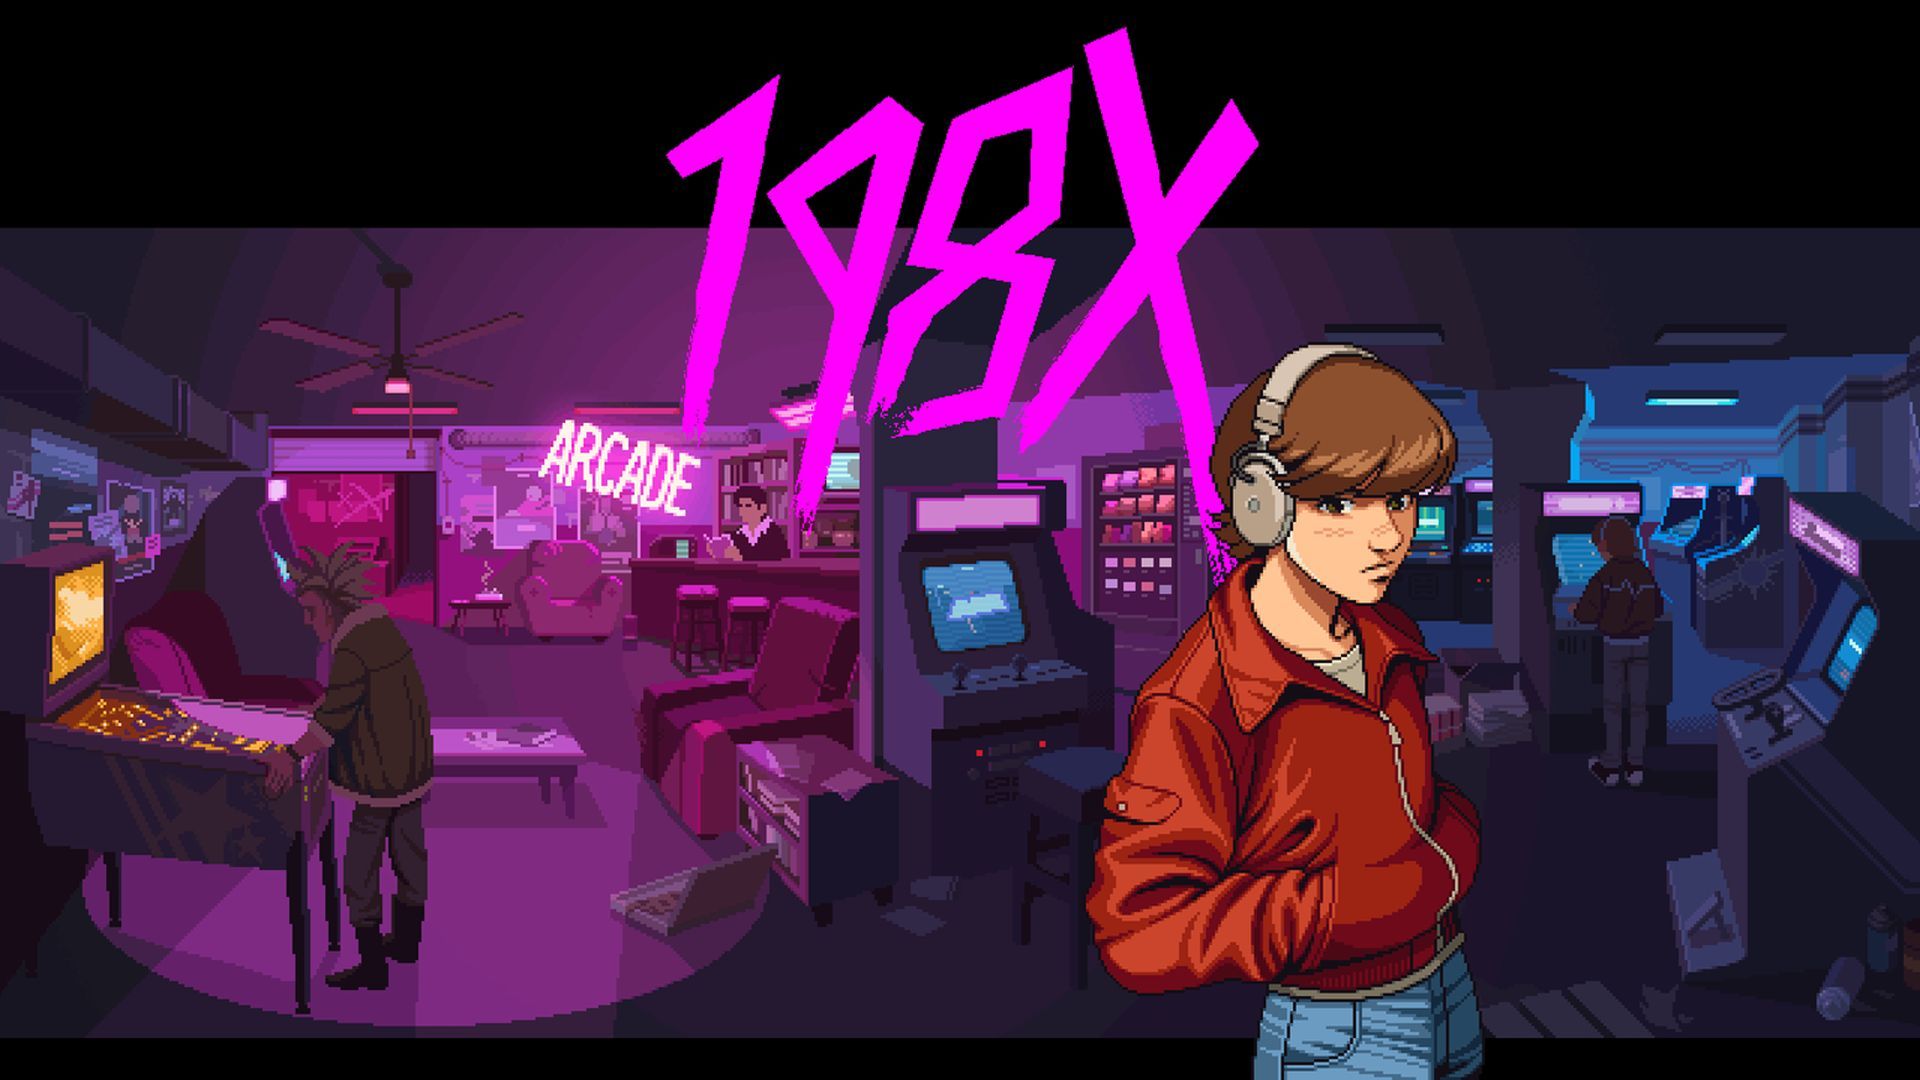 198X Releasing on June 20th for PS4 and PC, Pays Tribute to Arcade